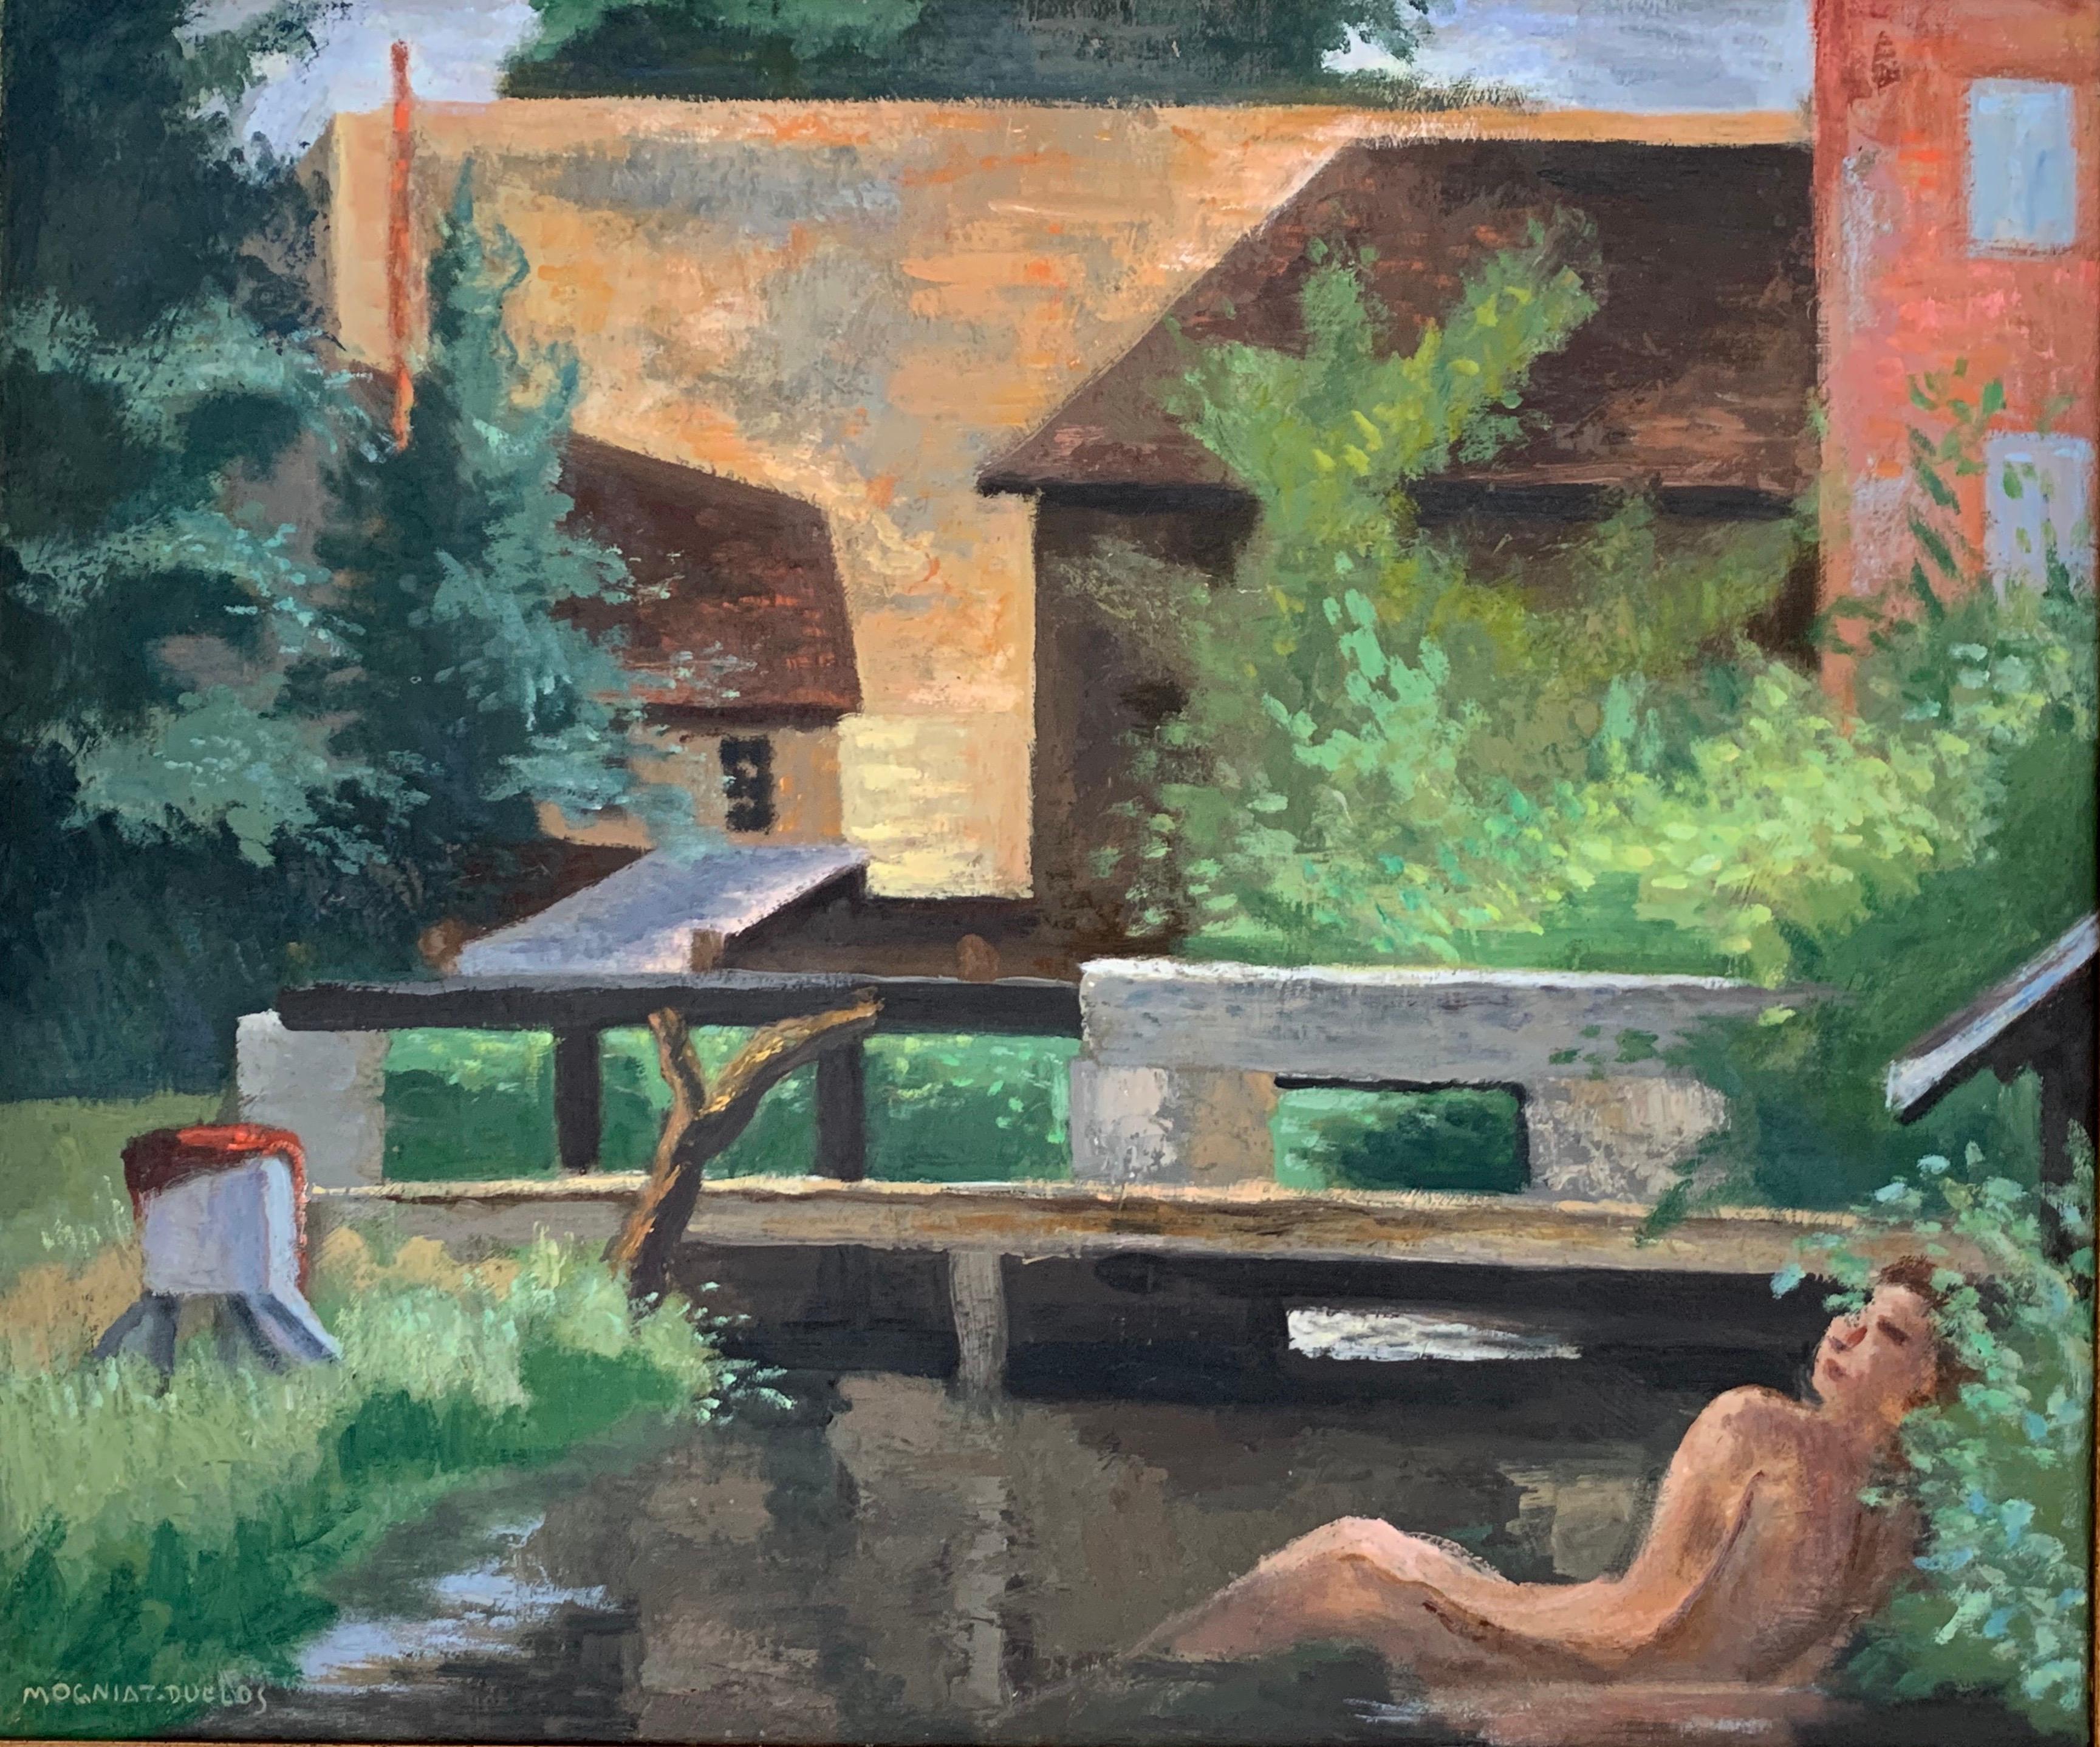 Bertrand Mogniat-Duclos  Landscape Painting - Man Bathing in French Mill Pond Mid 20th Century French Post-Impressionist Oil